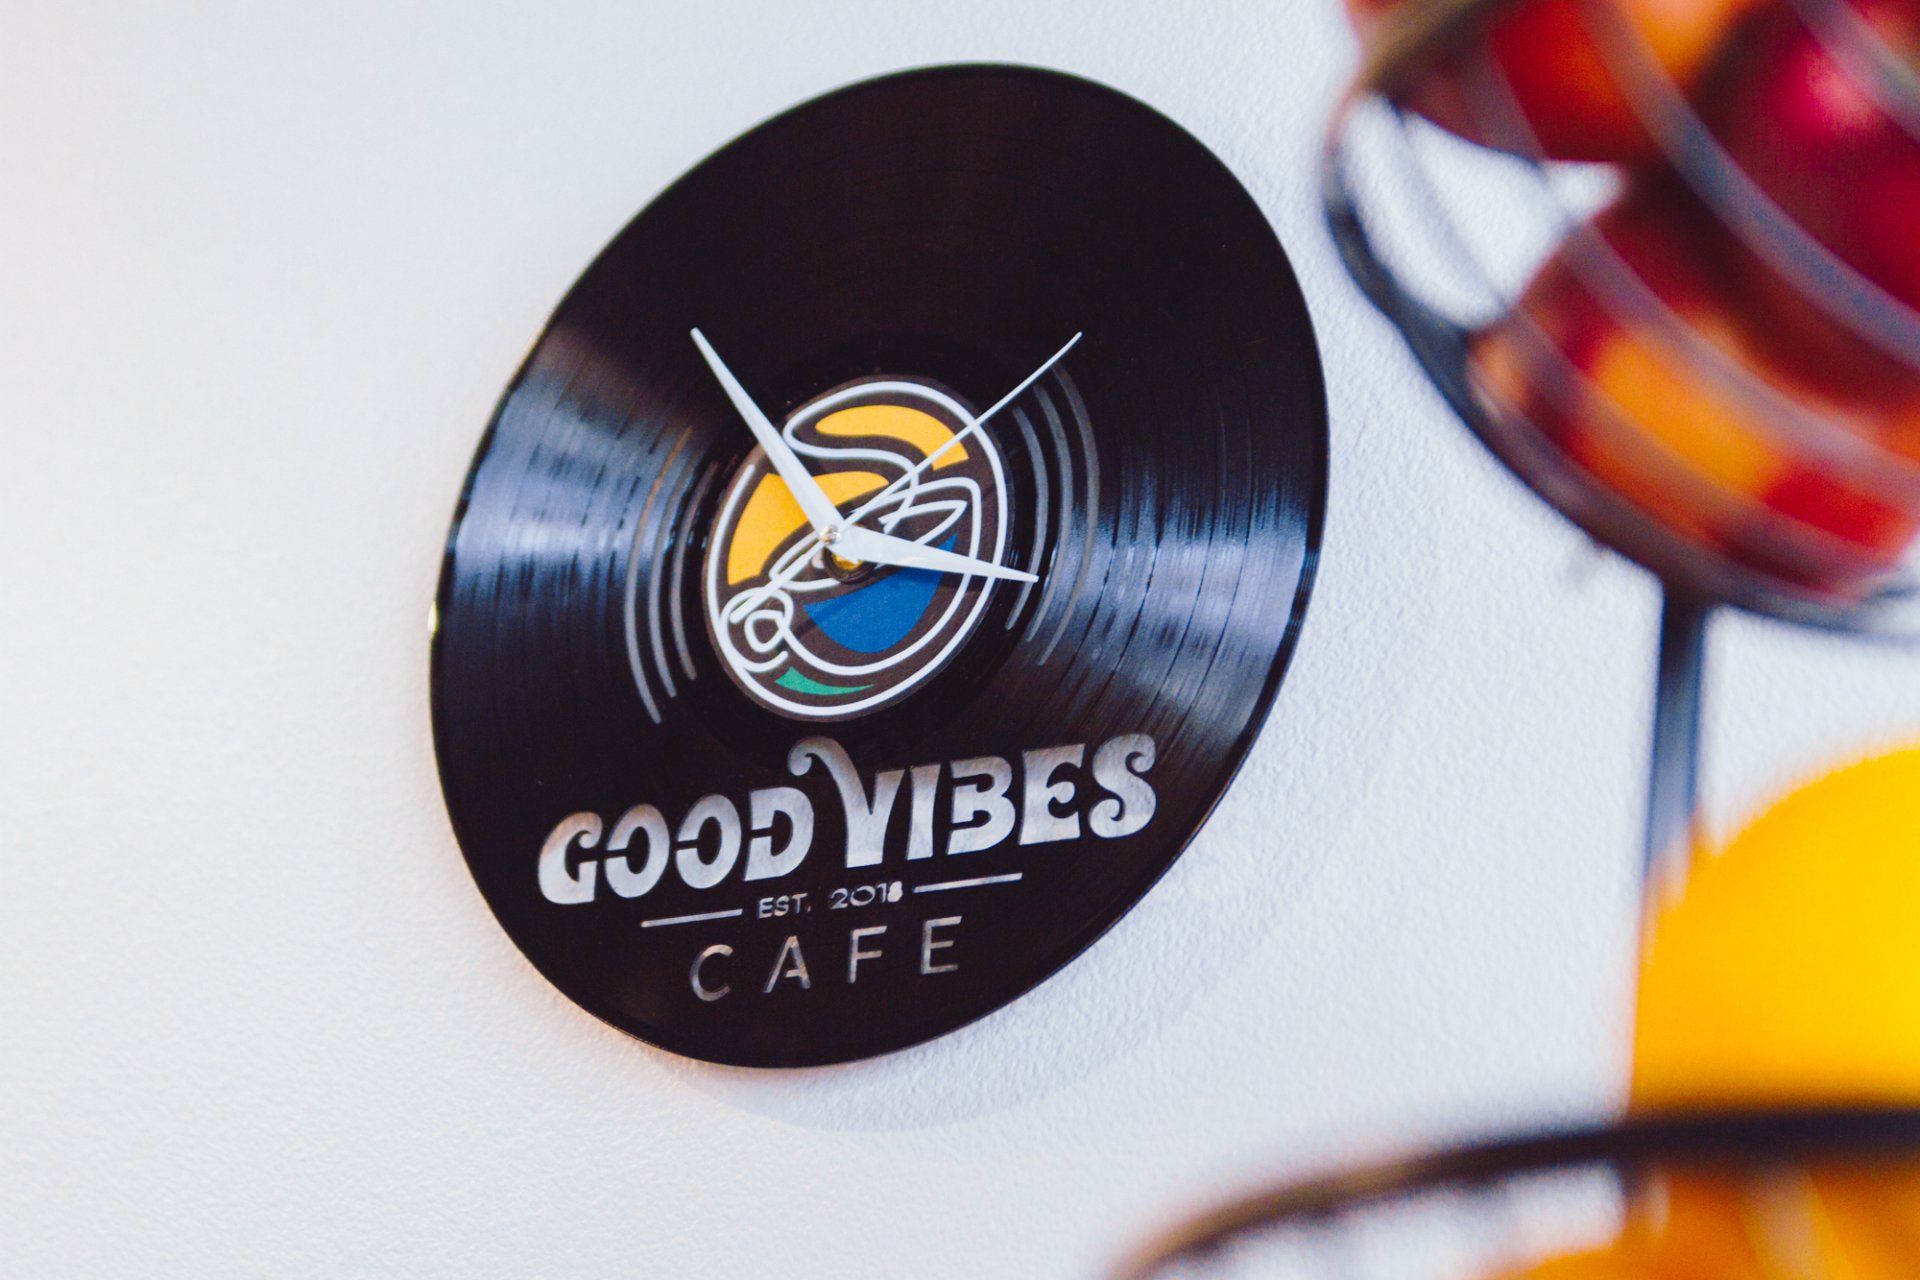 Good Vibes Cafe Gallery